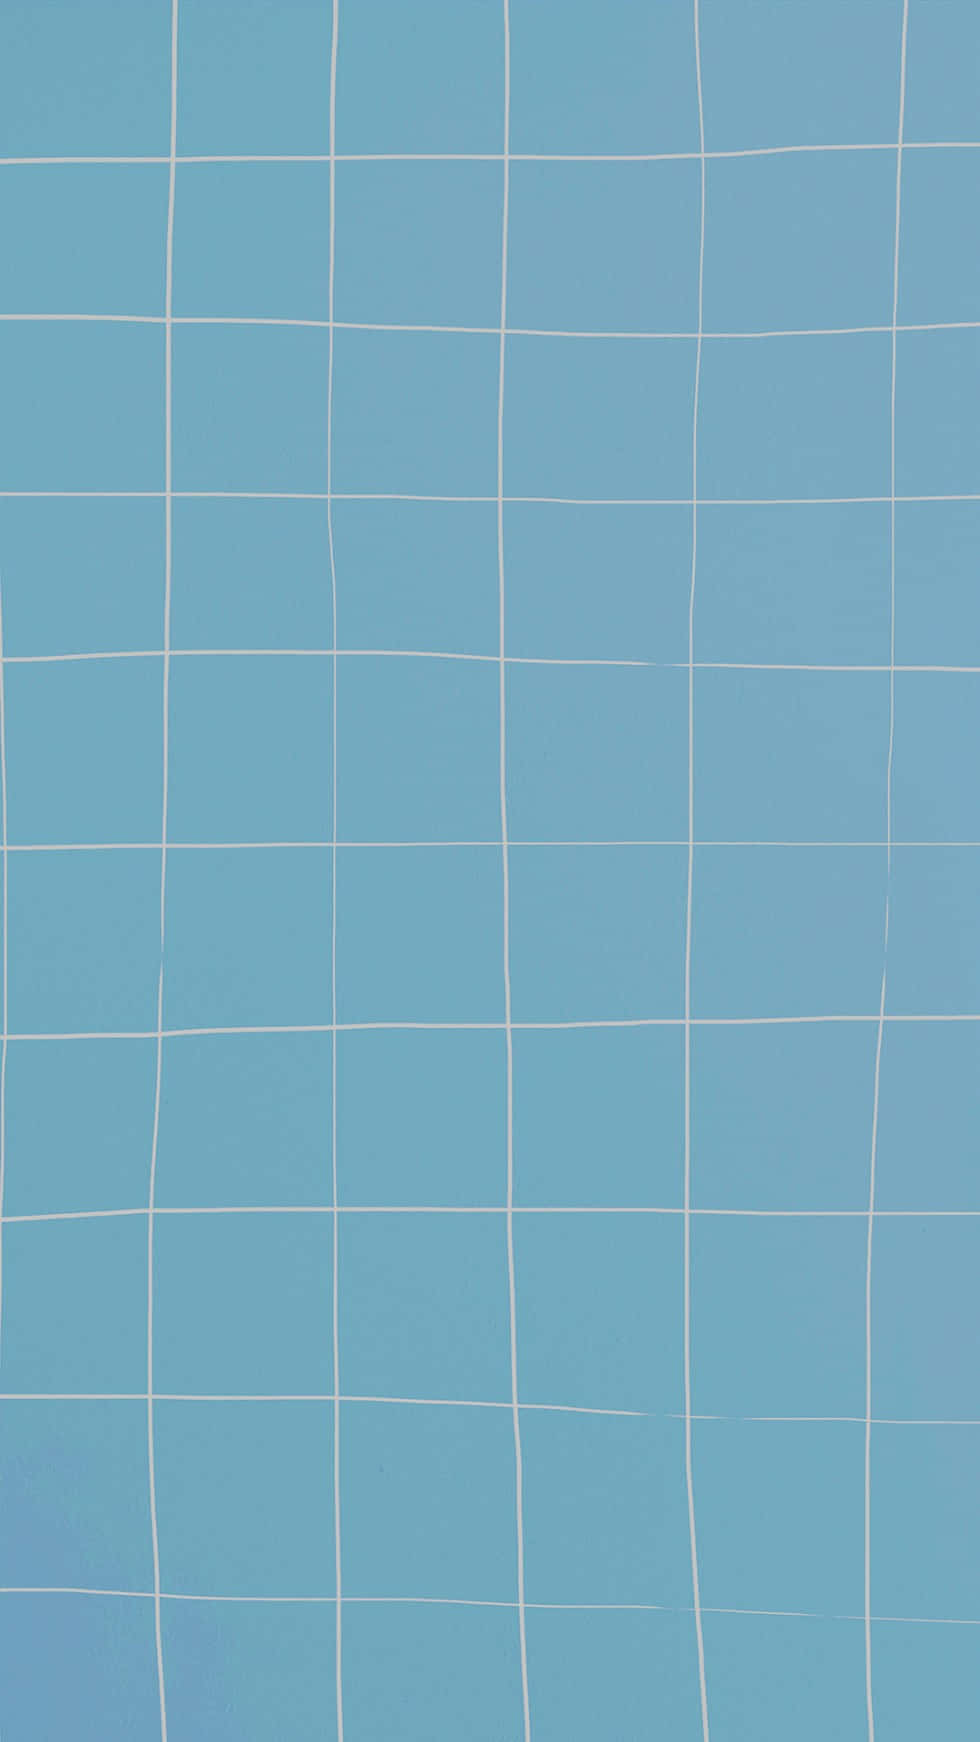 Aesthetic Blue Grid Line pictures